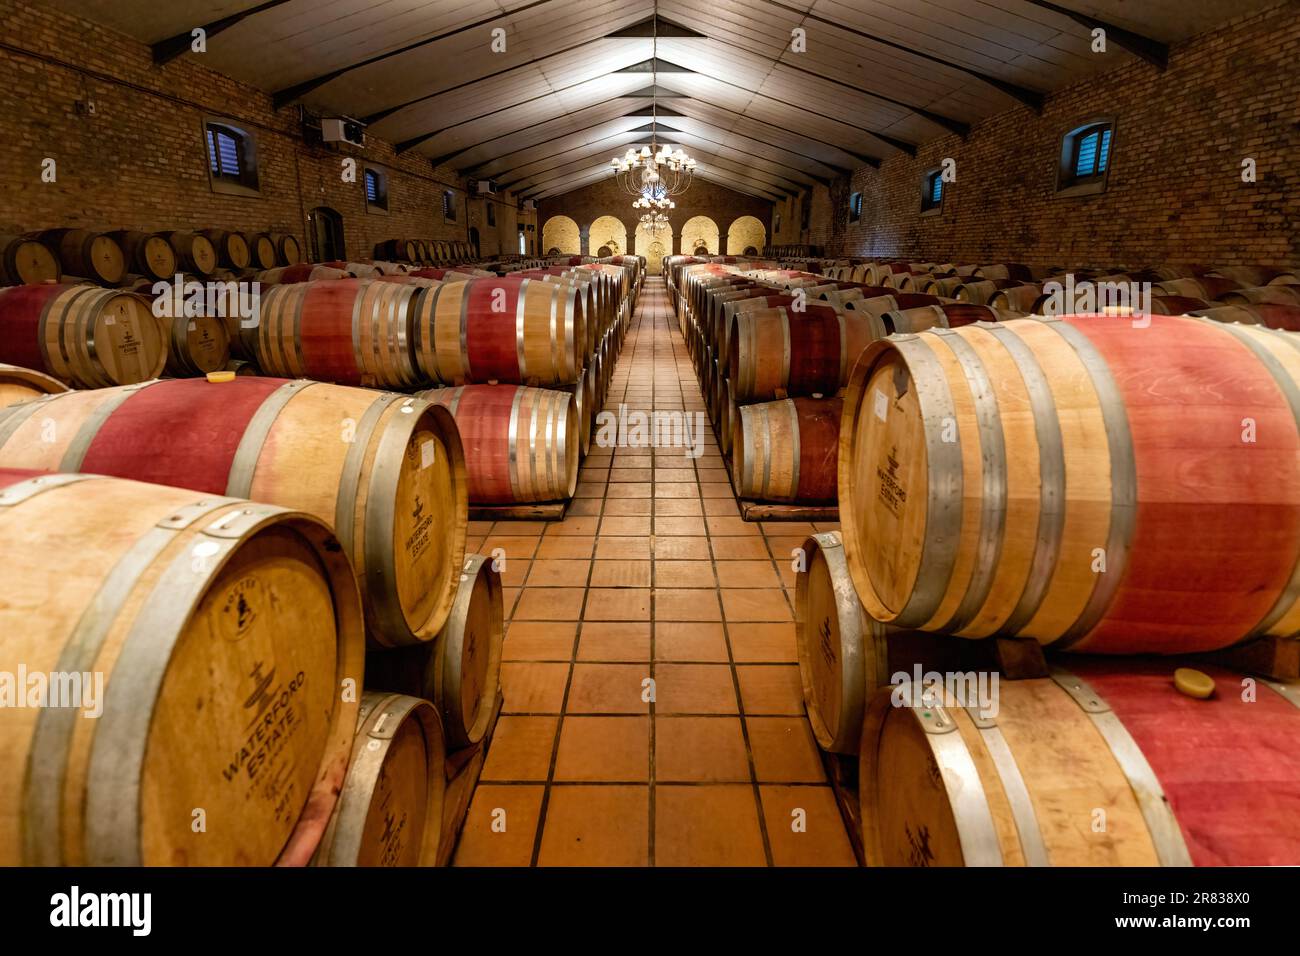 Cathedral cellar at the Waterford Estate in the Blaauwklippen Valley on the slopes of Helderberg Mountain - Stellenbosch, Winelands near Cape Town, So Stock Photo